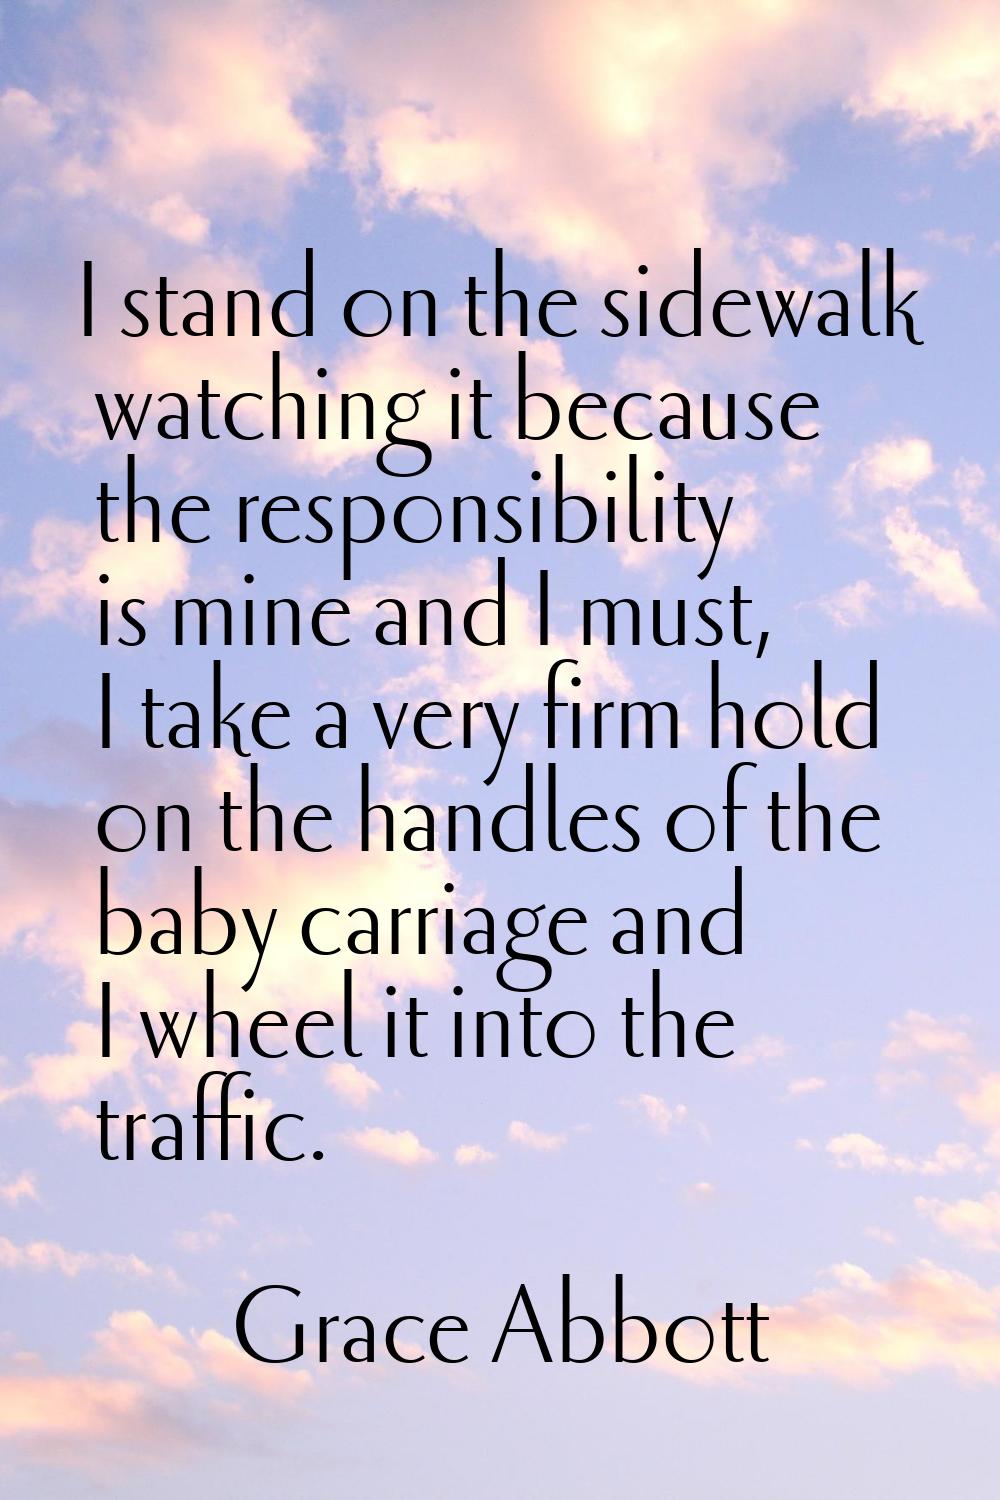 I stand on the sidewalk watching it because the responsibility is mine and I must, I take a very fi